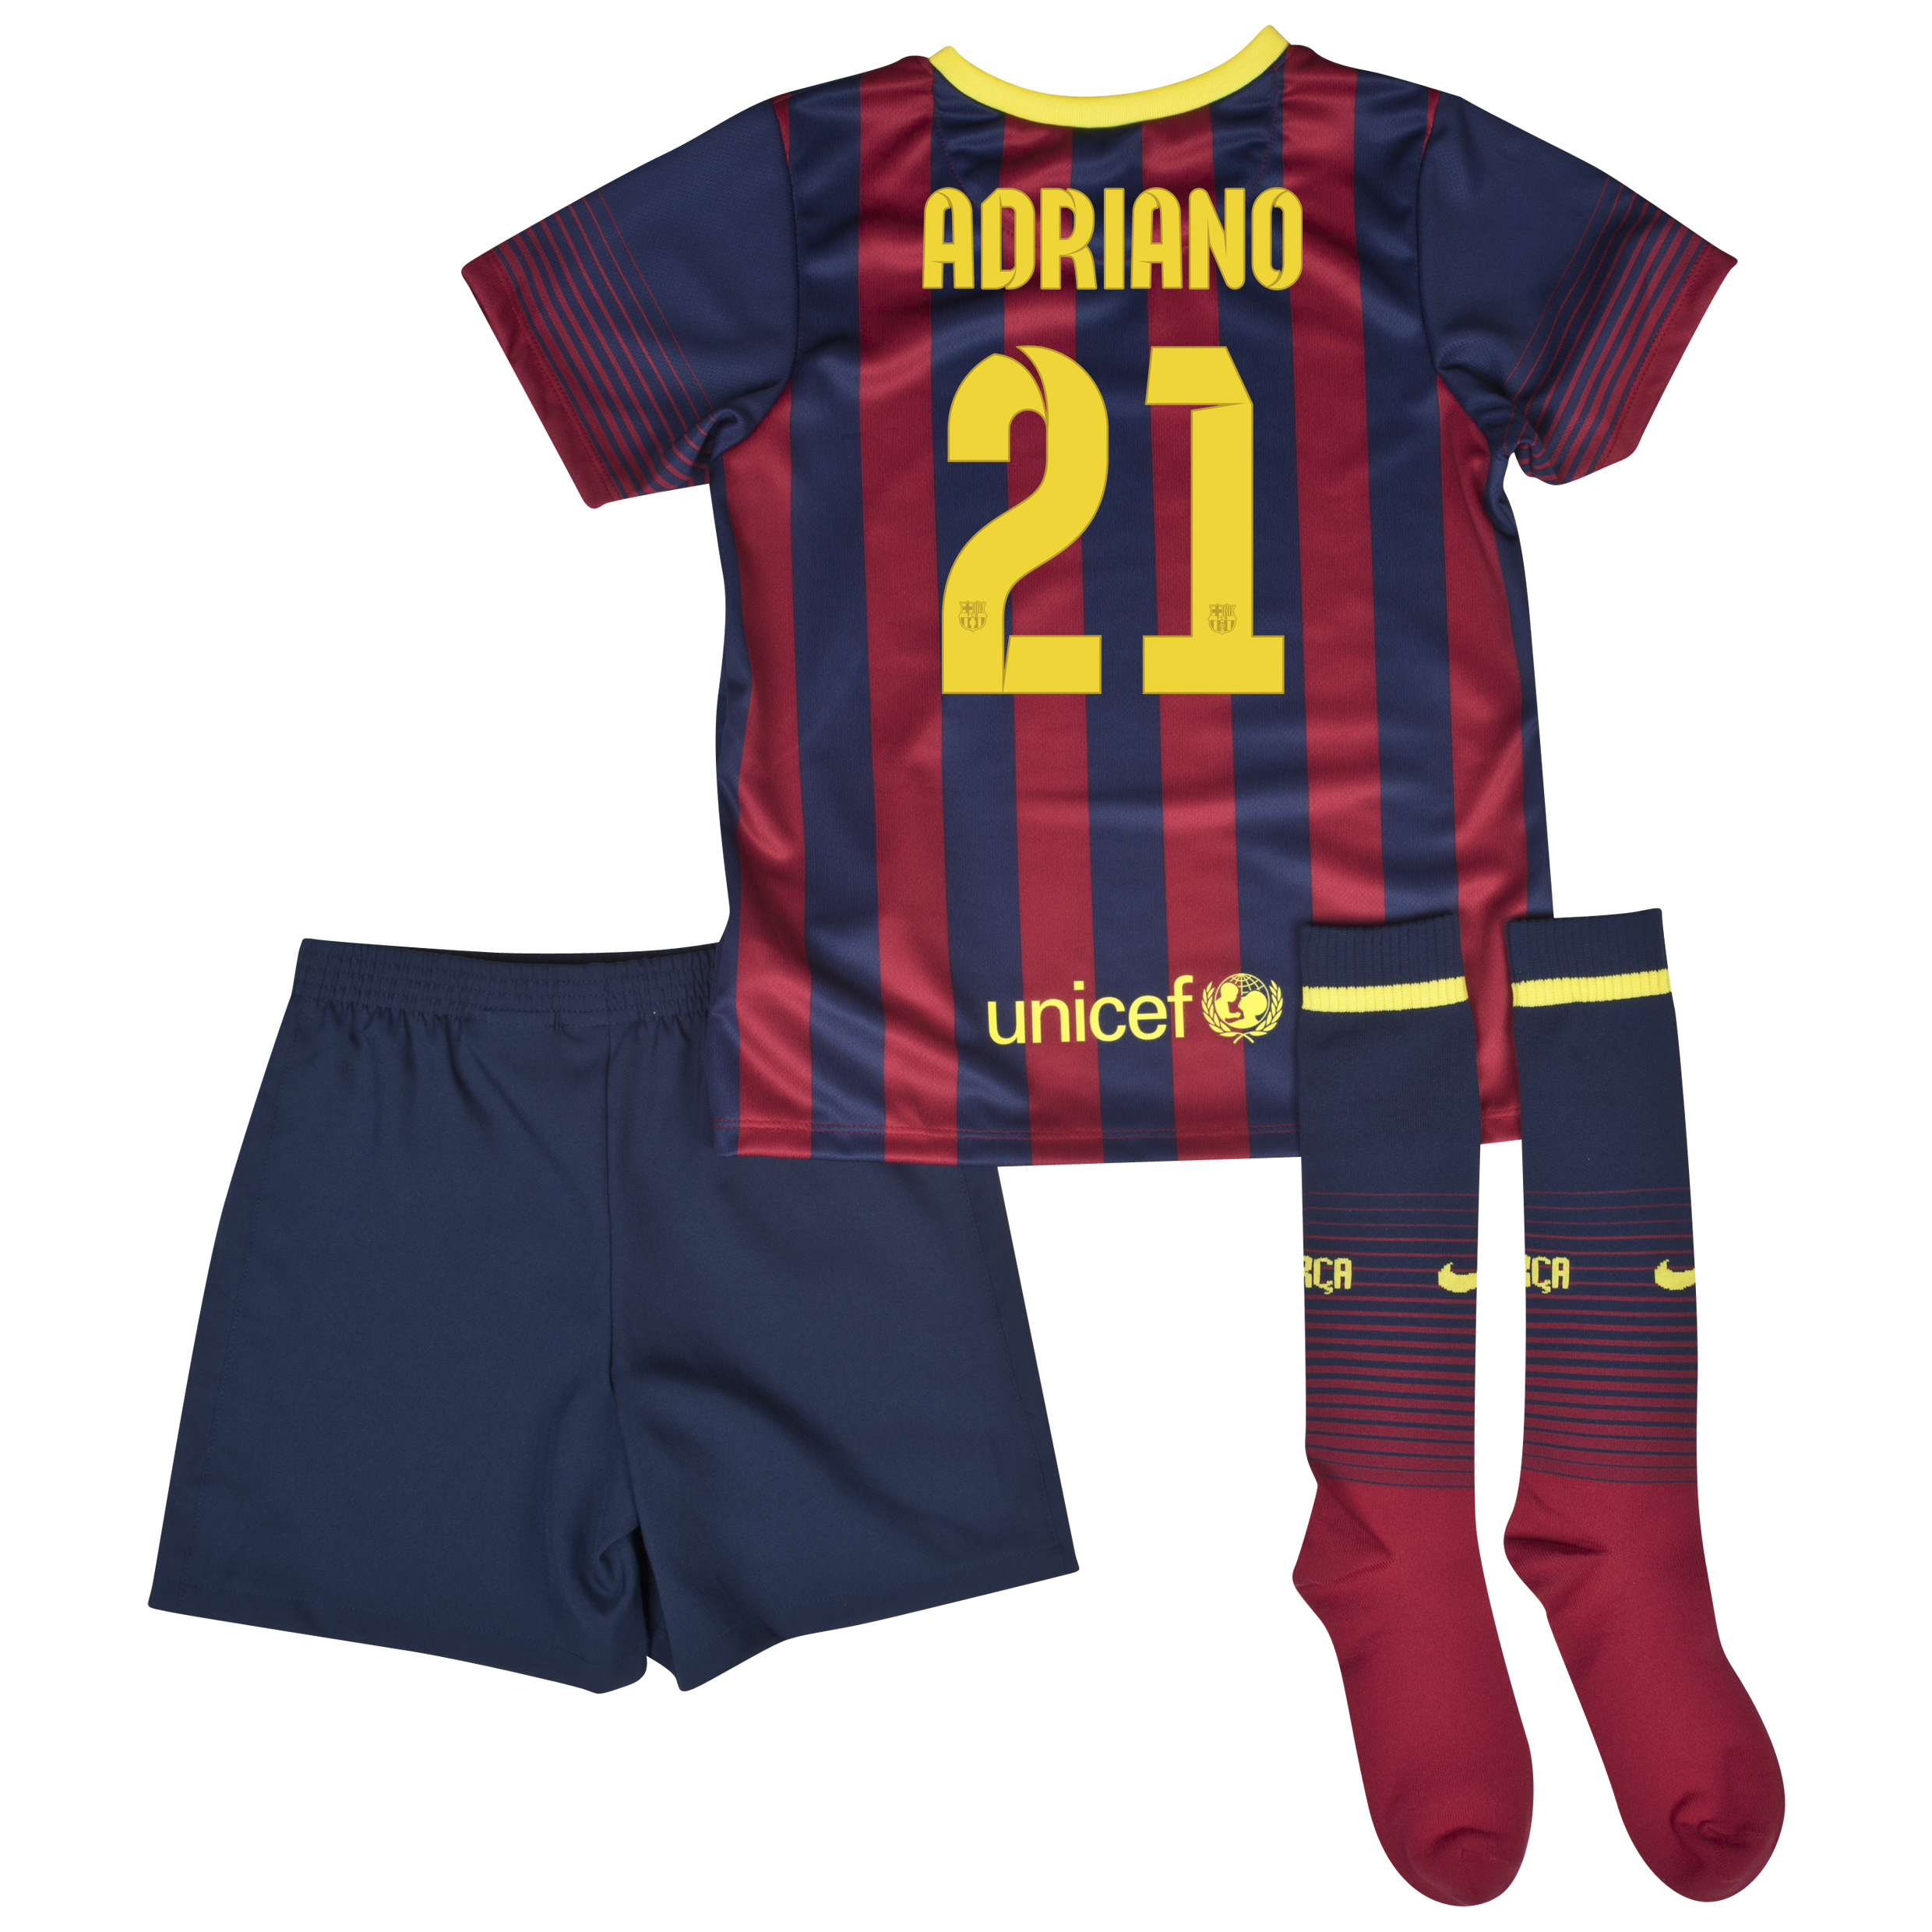 Barcelona Home Kit 2013/14 - Little Boys with Adriano 21 printing